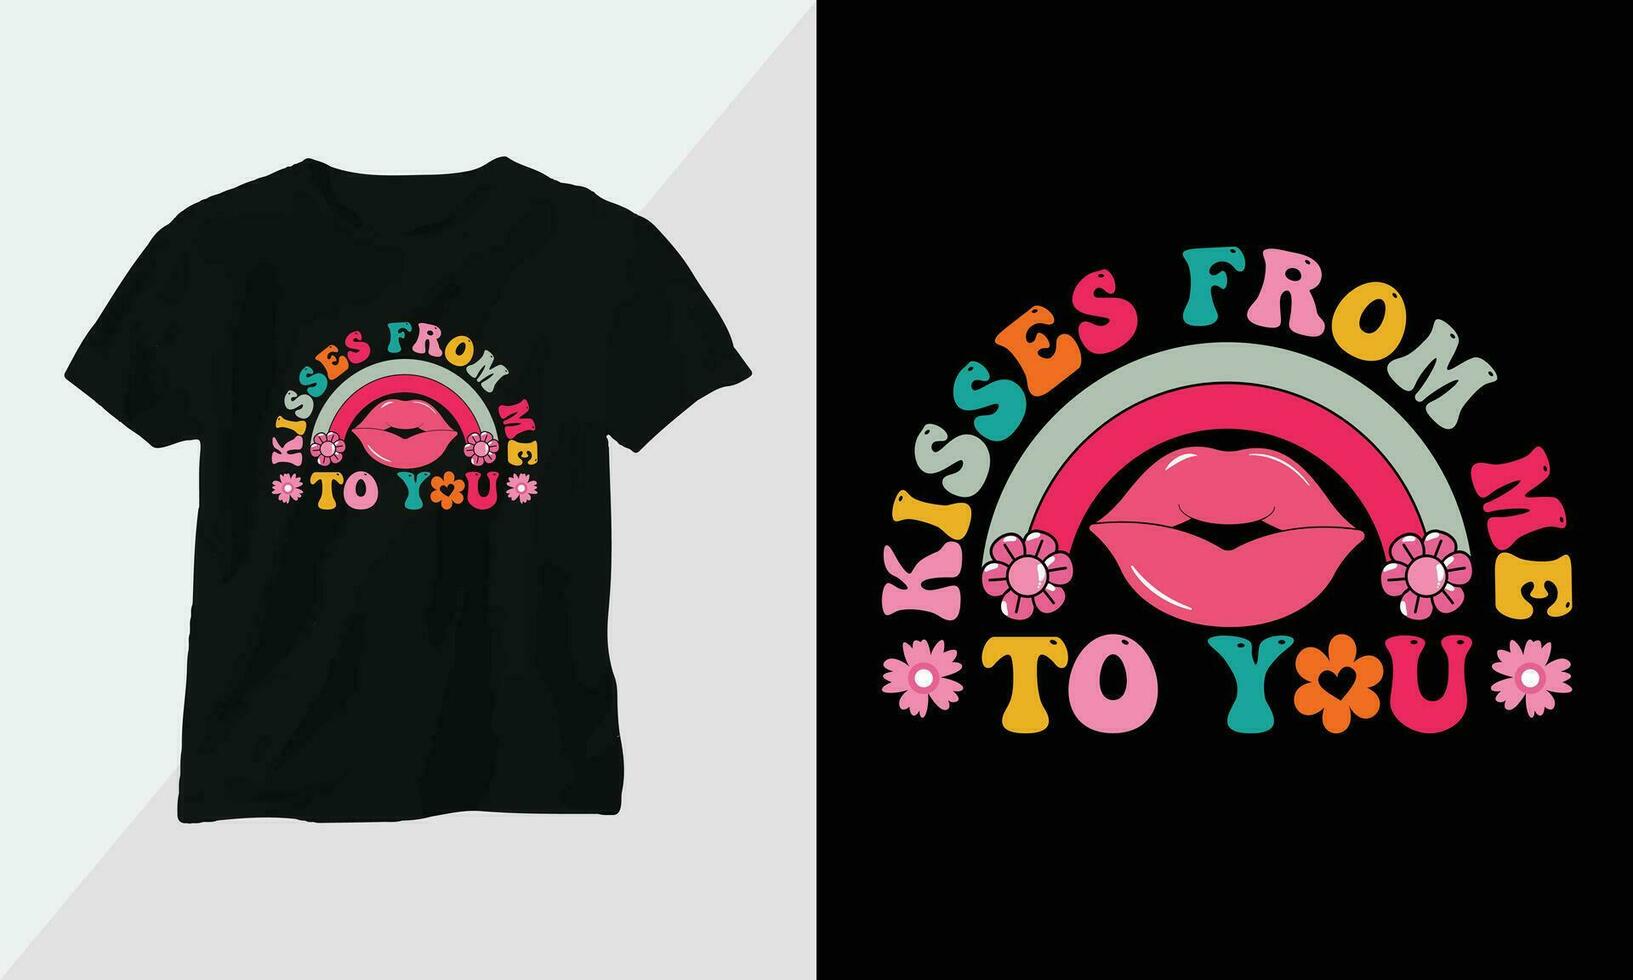 Kisses from me to you - Retro Groovy Inspirational T-shirt Design with retro style vector